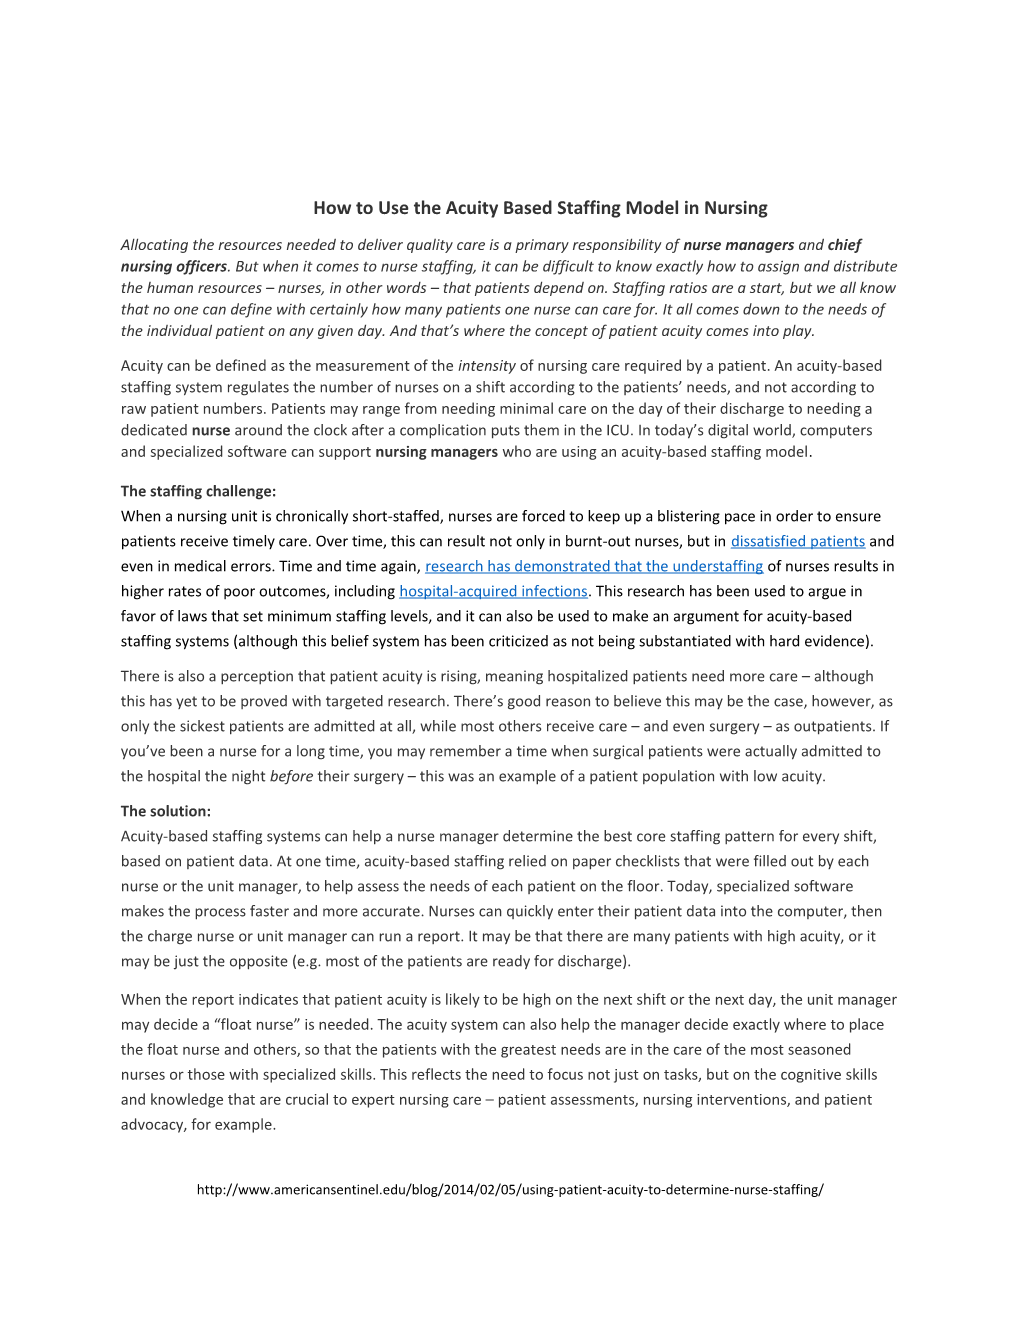 How to Use the Acuity Based Staffing Model in Nursing